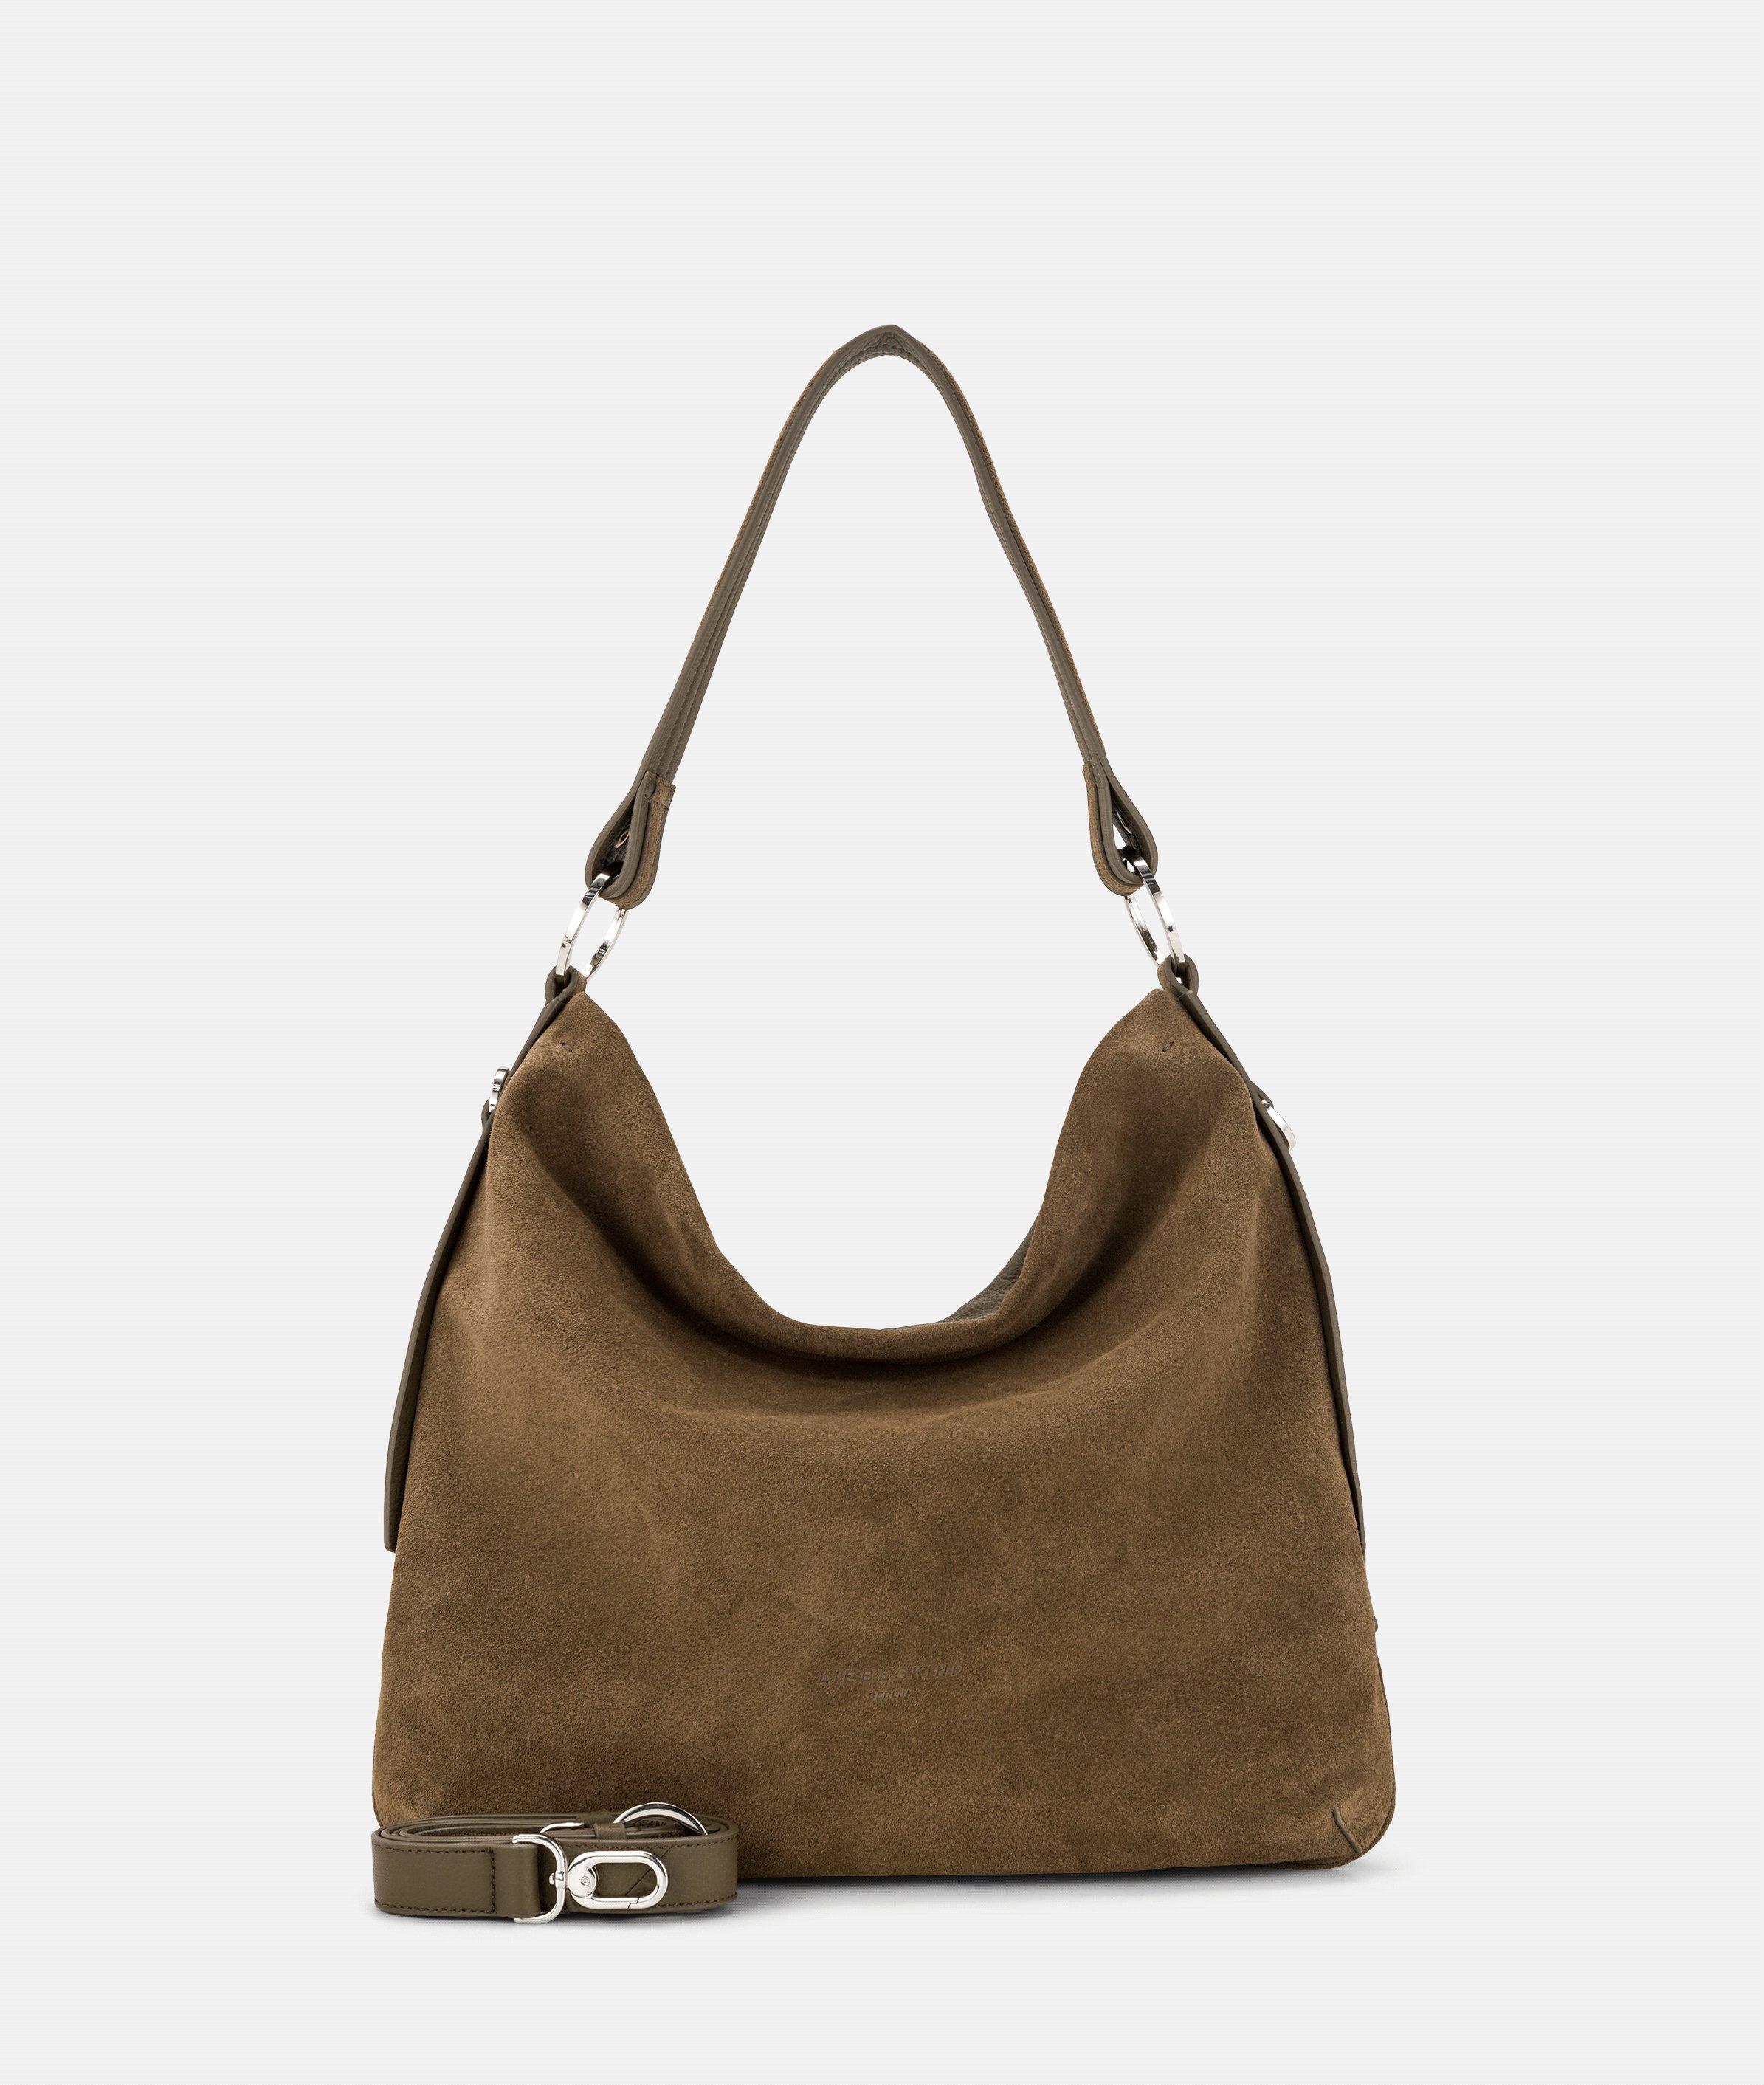 Leather handbags, shopping bags and mini bags | LIEBESKIND Berlin